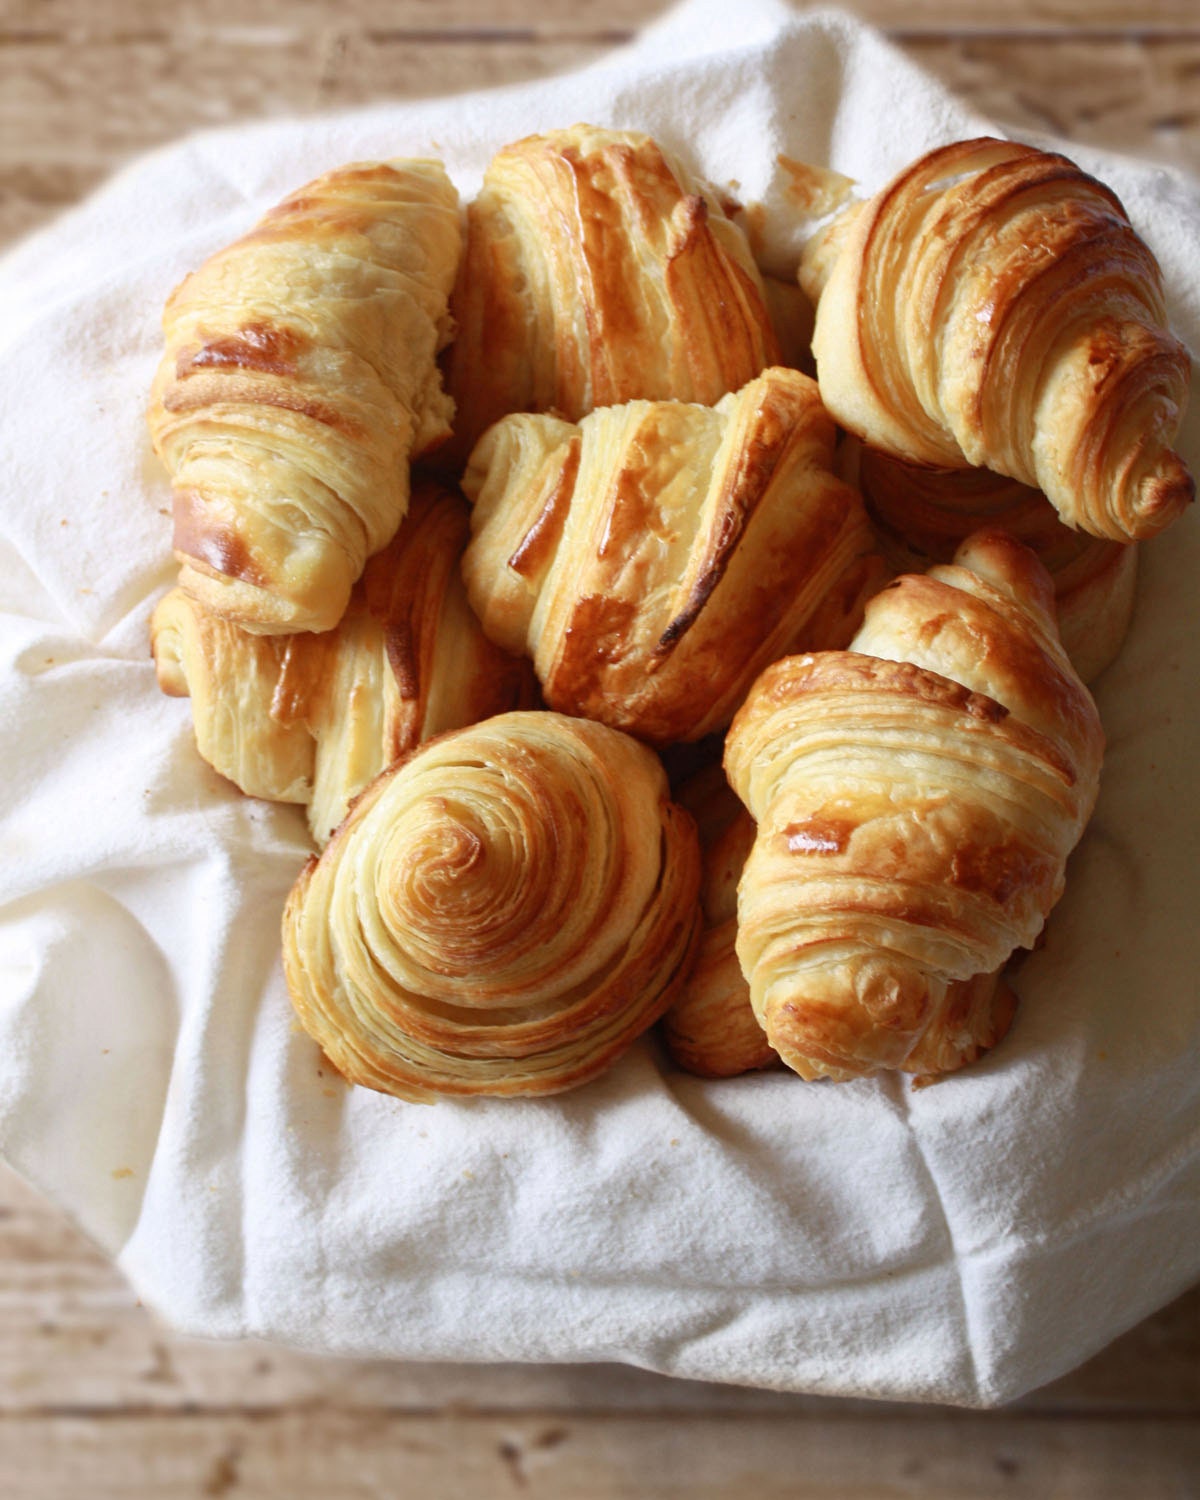 Food Photography - Basket of Croissants - Golden Baked Bread French Pastry - 8x10 Fine Art Photo Print - summerowens